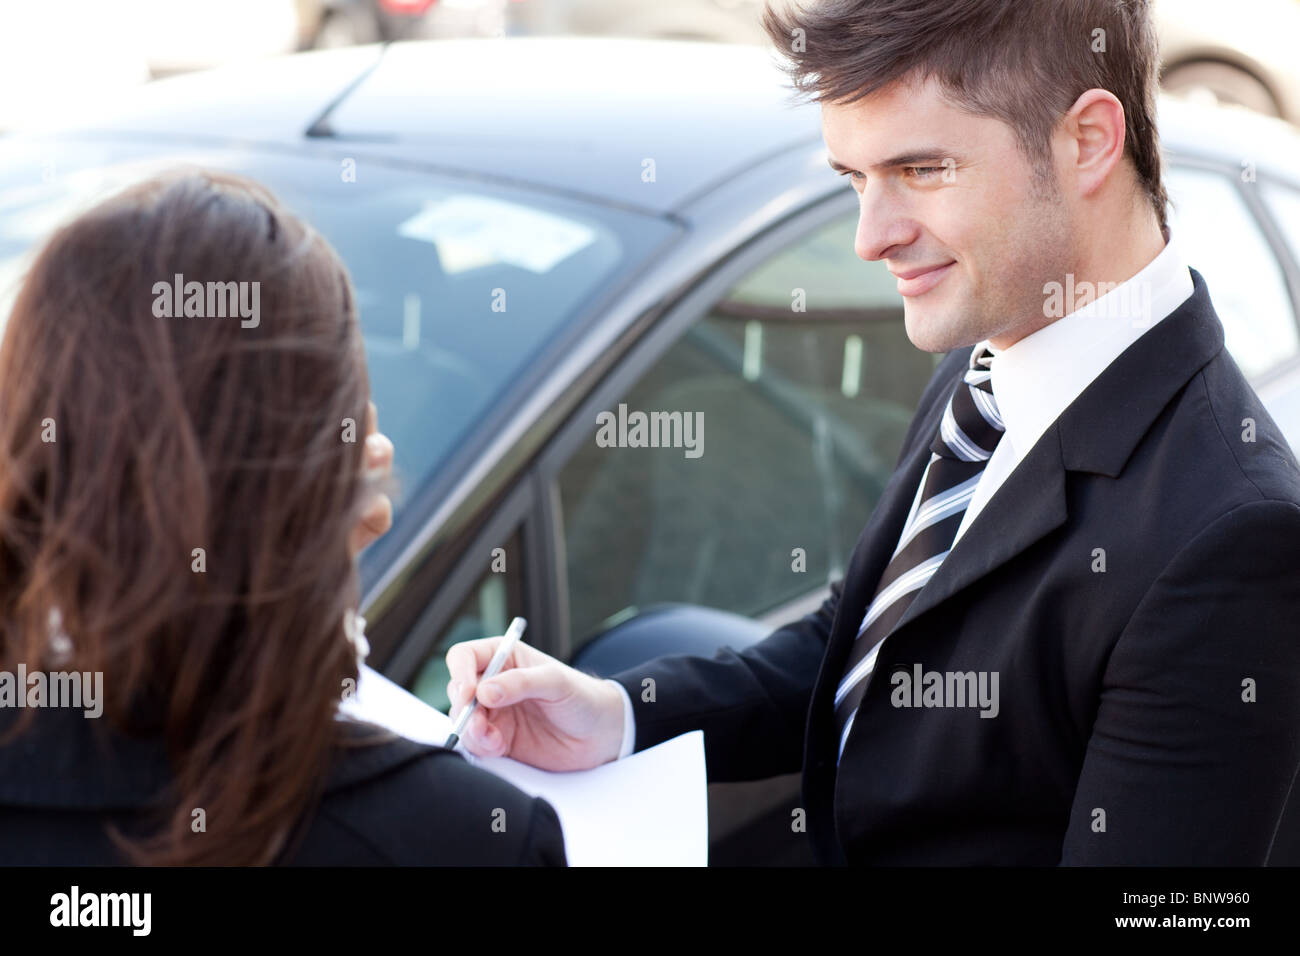 Pretty businessman meeting his colleague Stock Photo